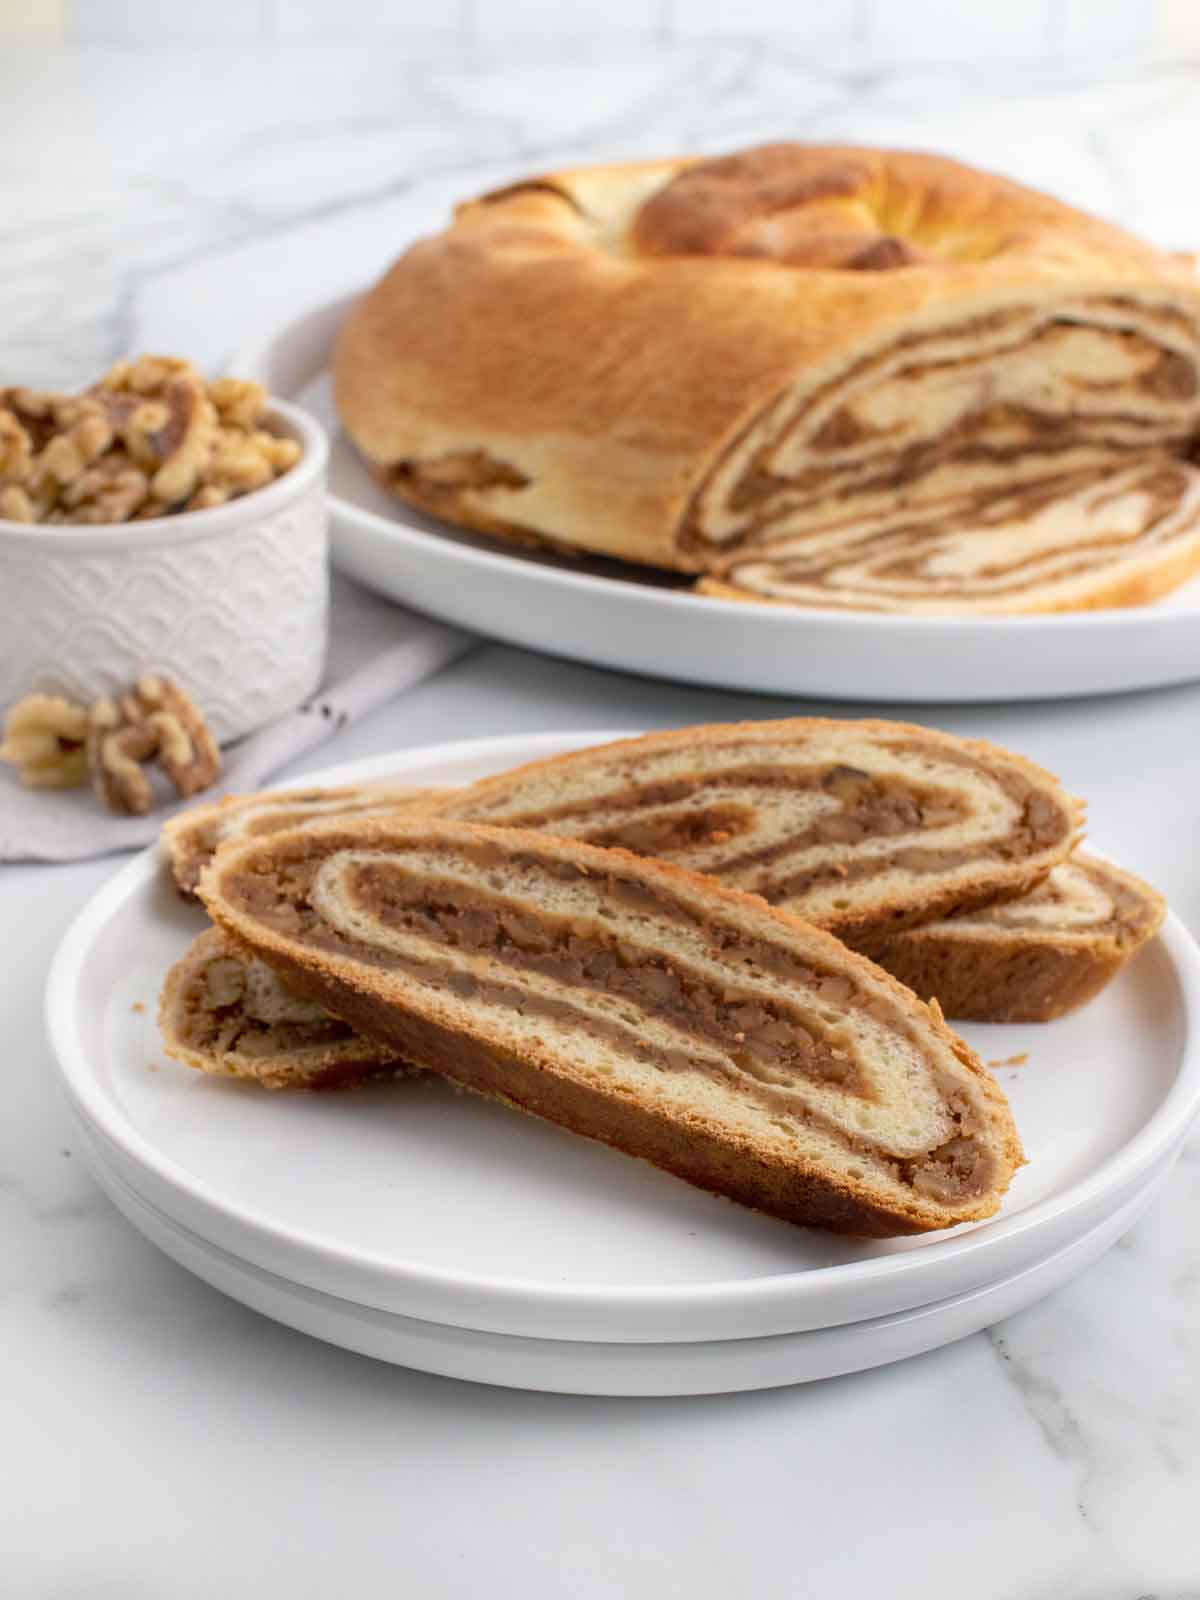 slices of potica on a white plate with remainder of loaf behind it